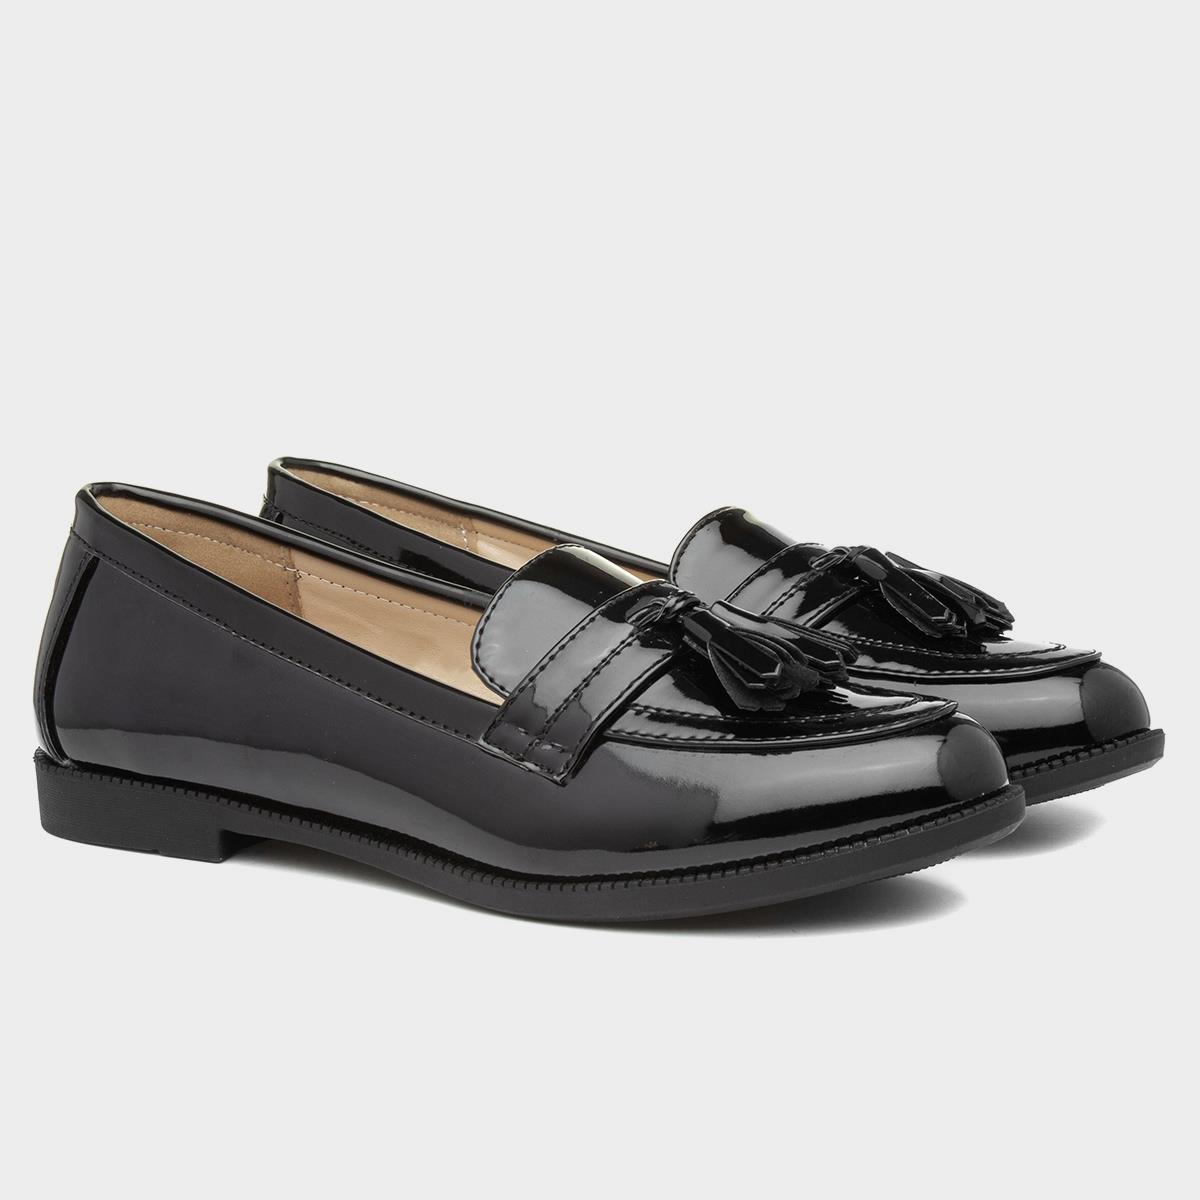 Lilley Womens Black Patent Loafer-15072 | Shoe Zone